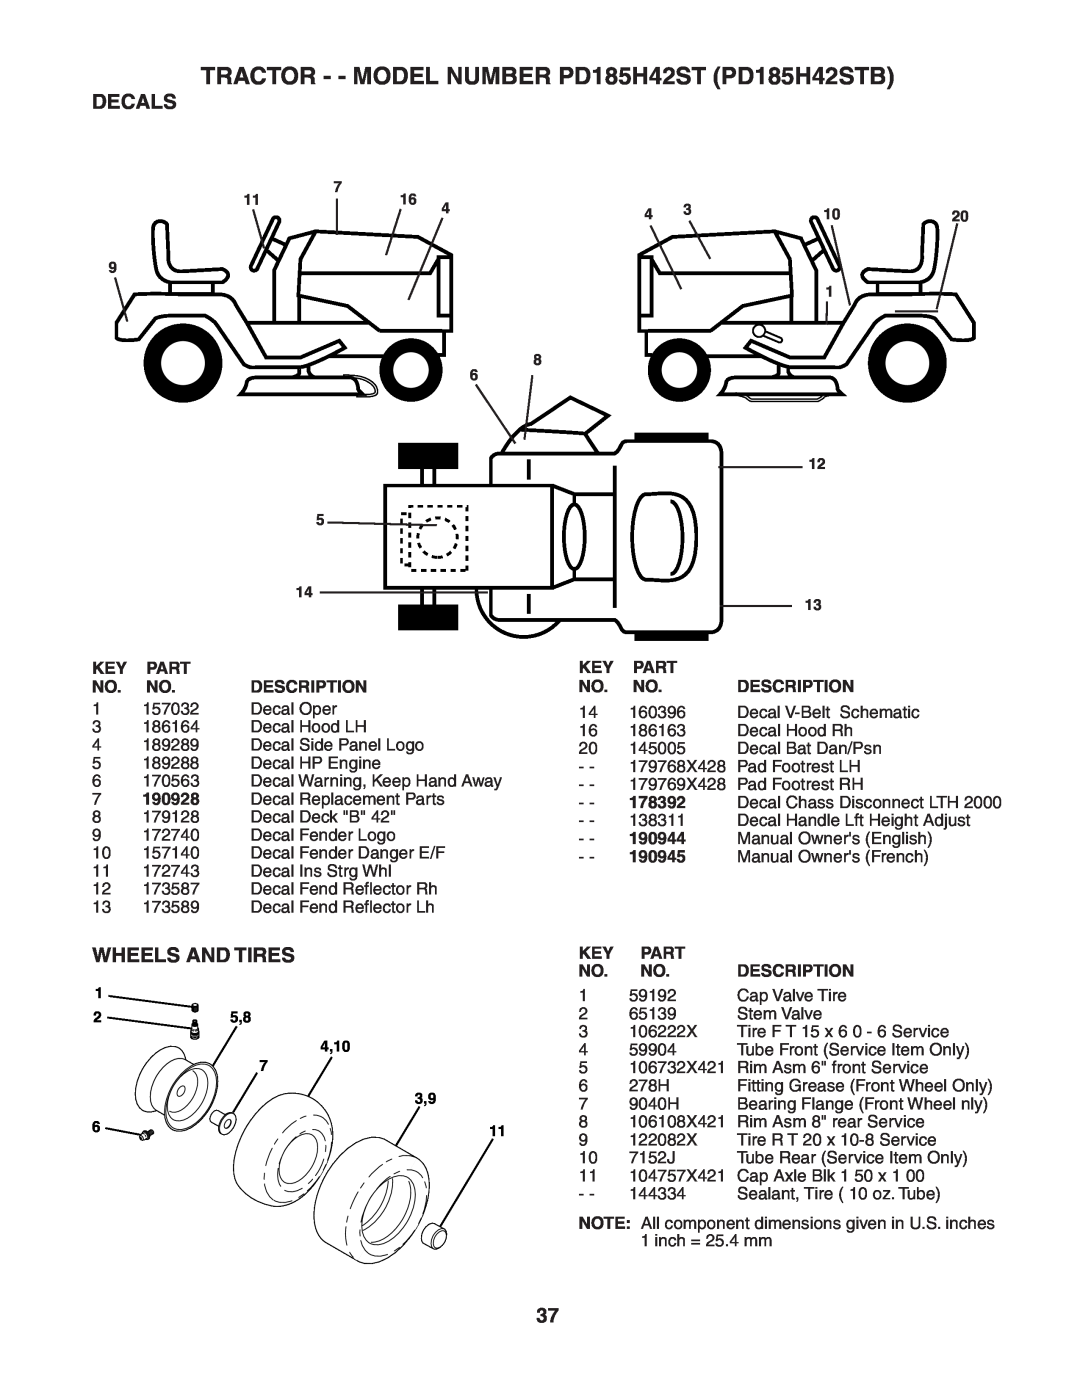 Poulan 190944 owner manual Decals, Wheels And Tires, TRACTOR - - MODEL NUMBER PD185H42ST PD185H42STB 